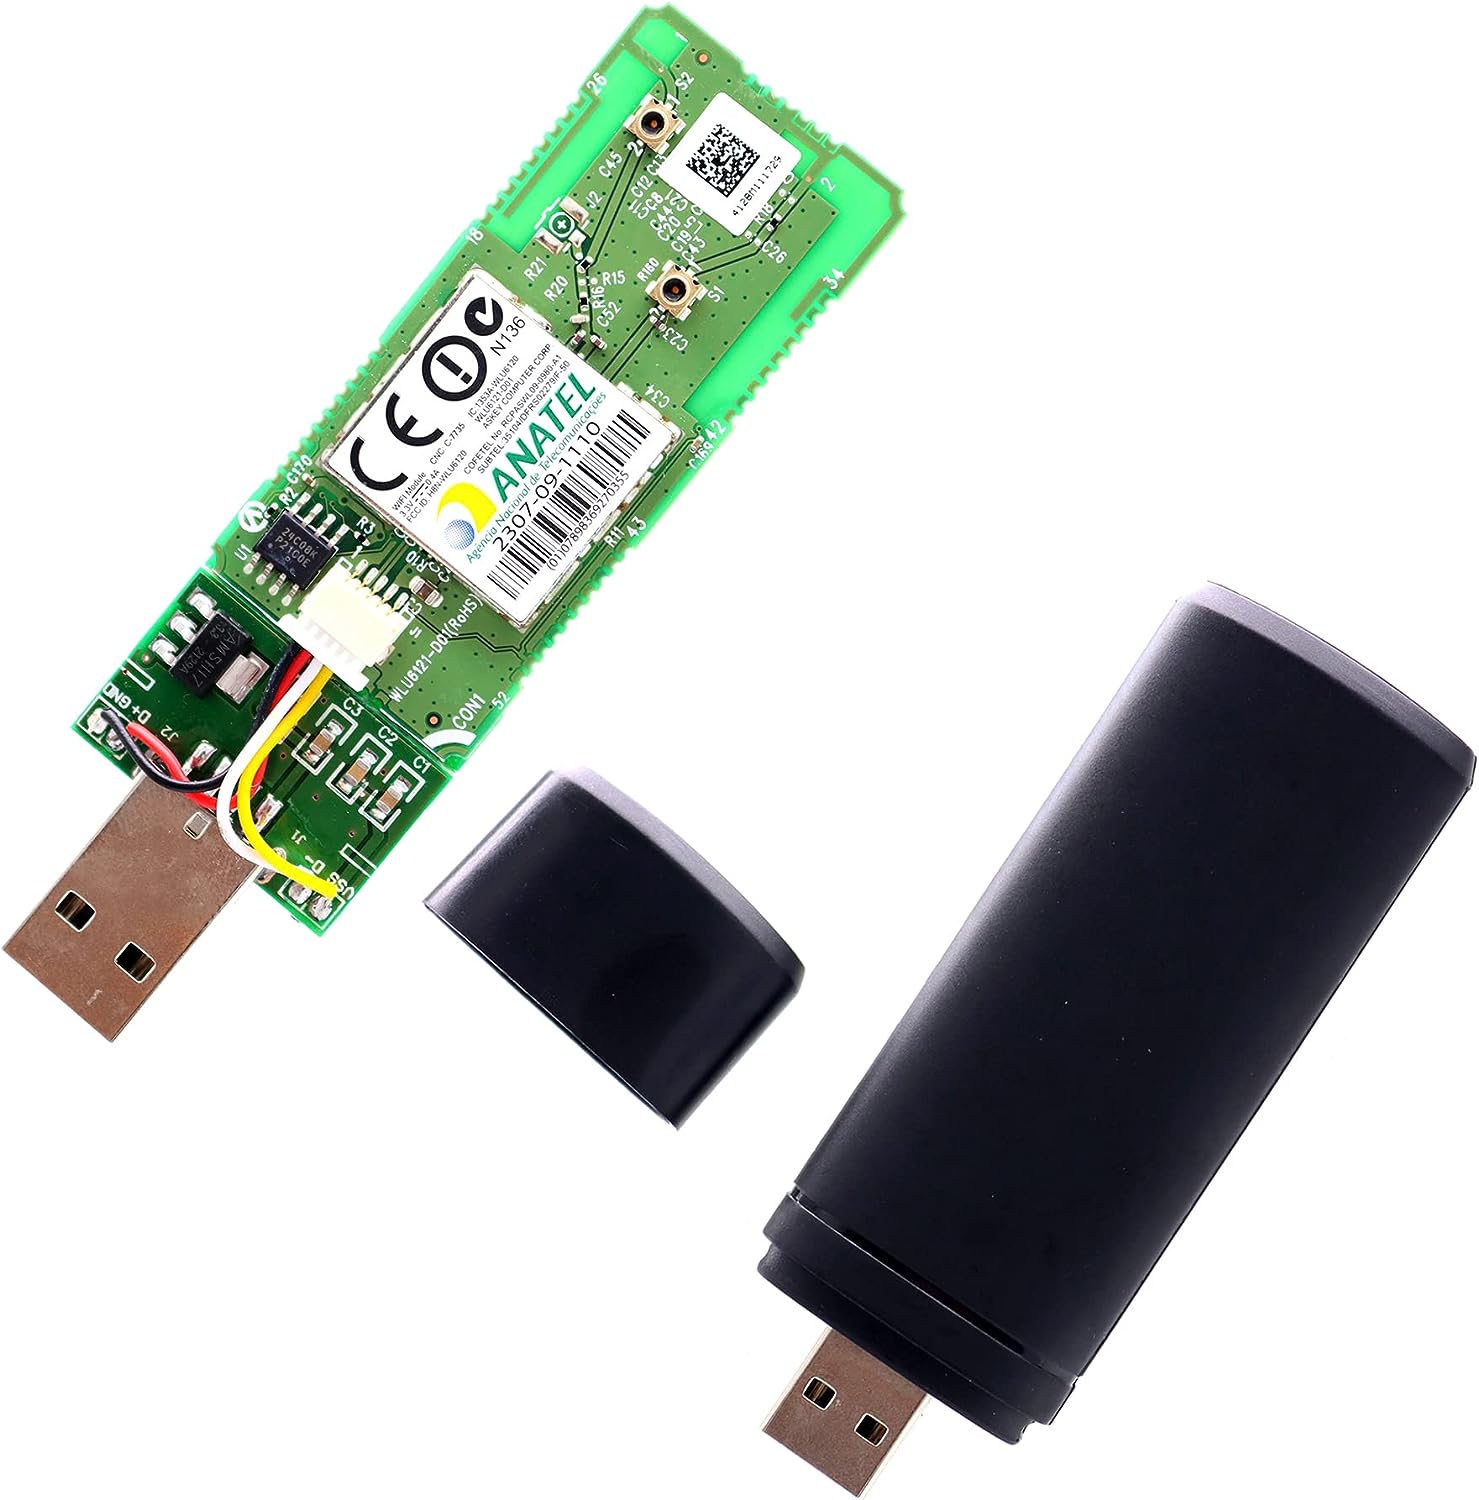 New 2.4GHz 150Mbps Wireless USB WiFi Adapter for [...]